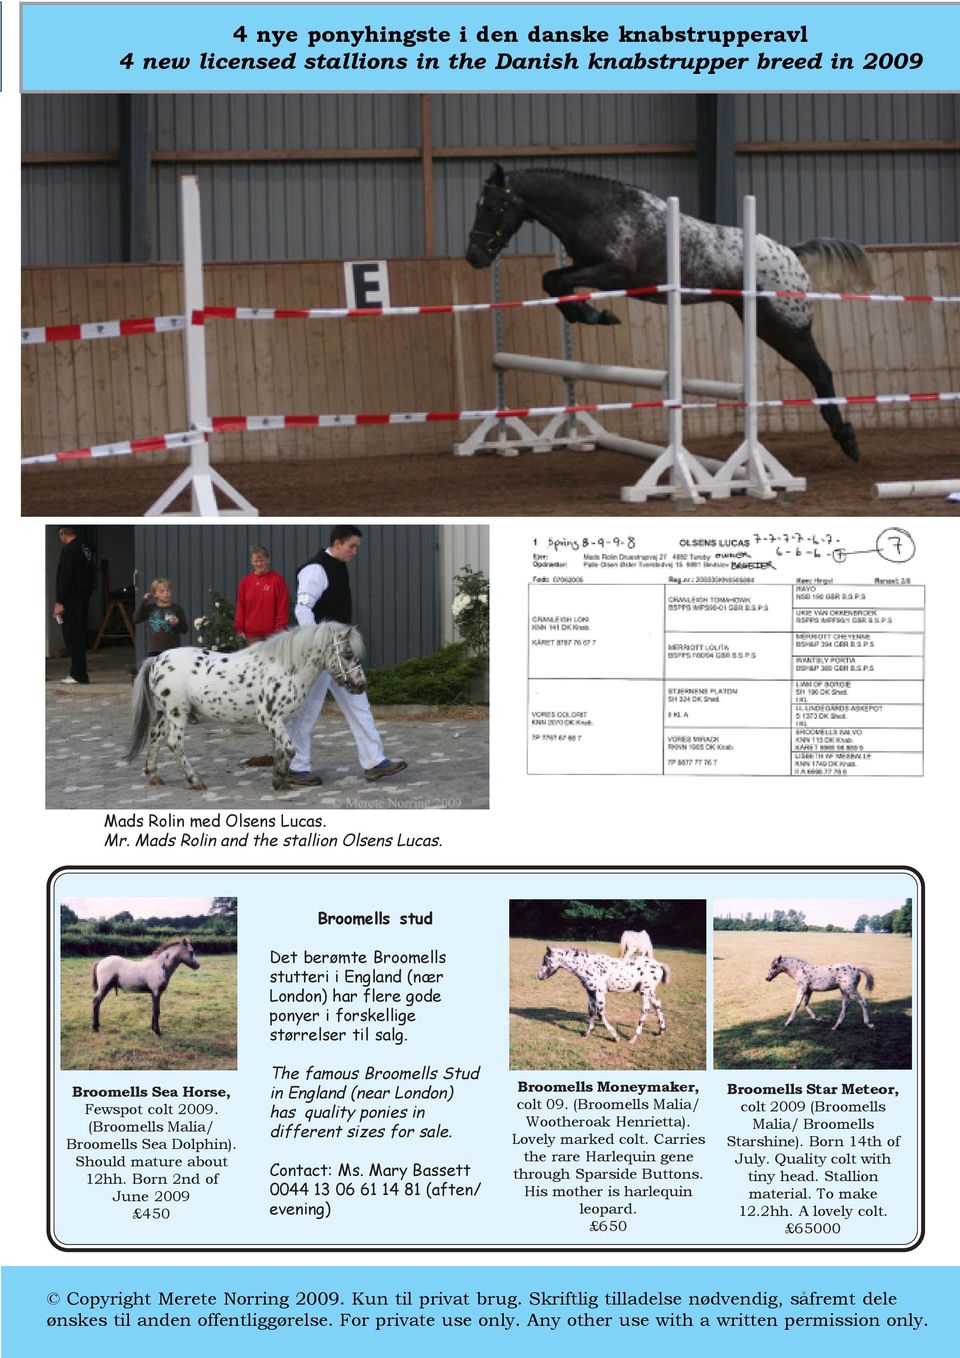 (Broomells Malia/ Broomells Sea Dolphin). Should mature about 12hh. Born 2nd of June 2009 450 The famous Broomells Stud in England (near London) has quality ponies in different sizes for sale.